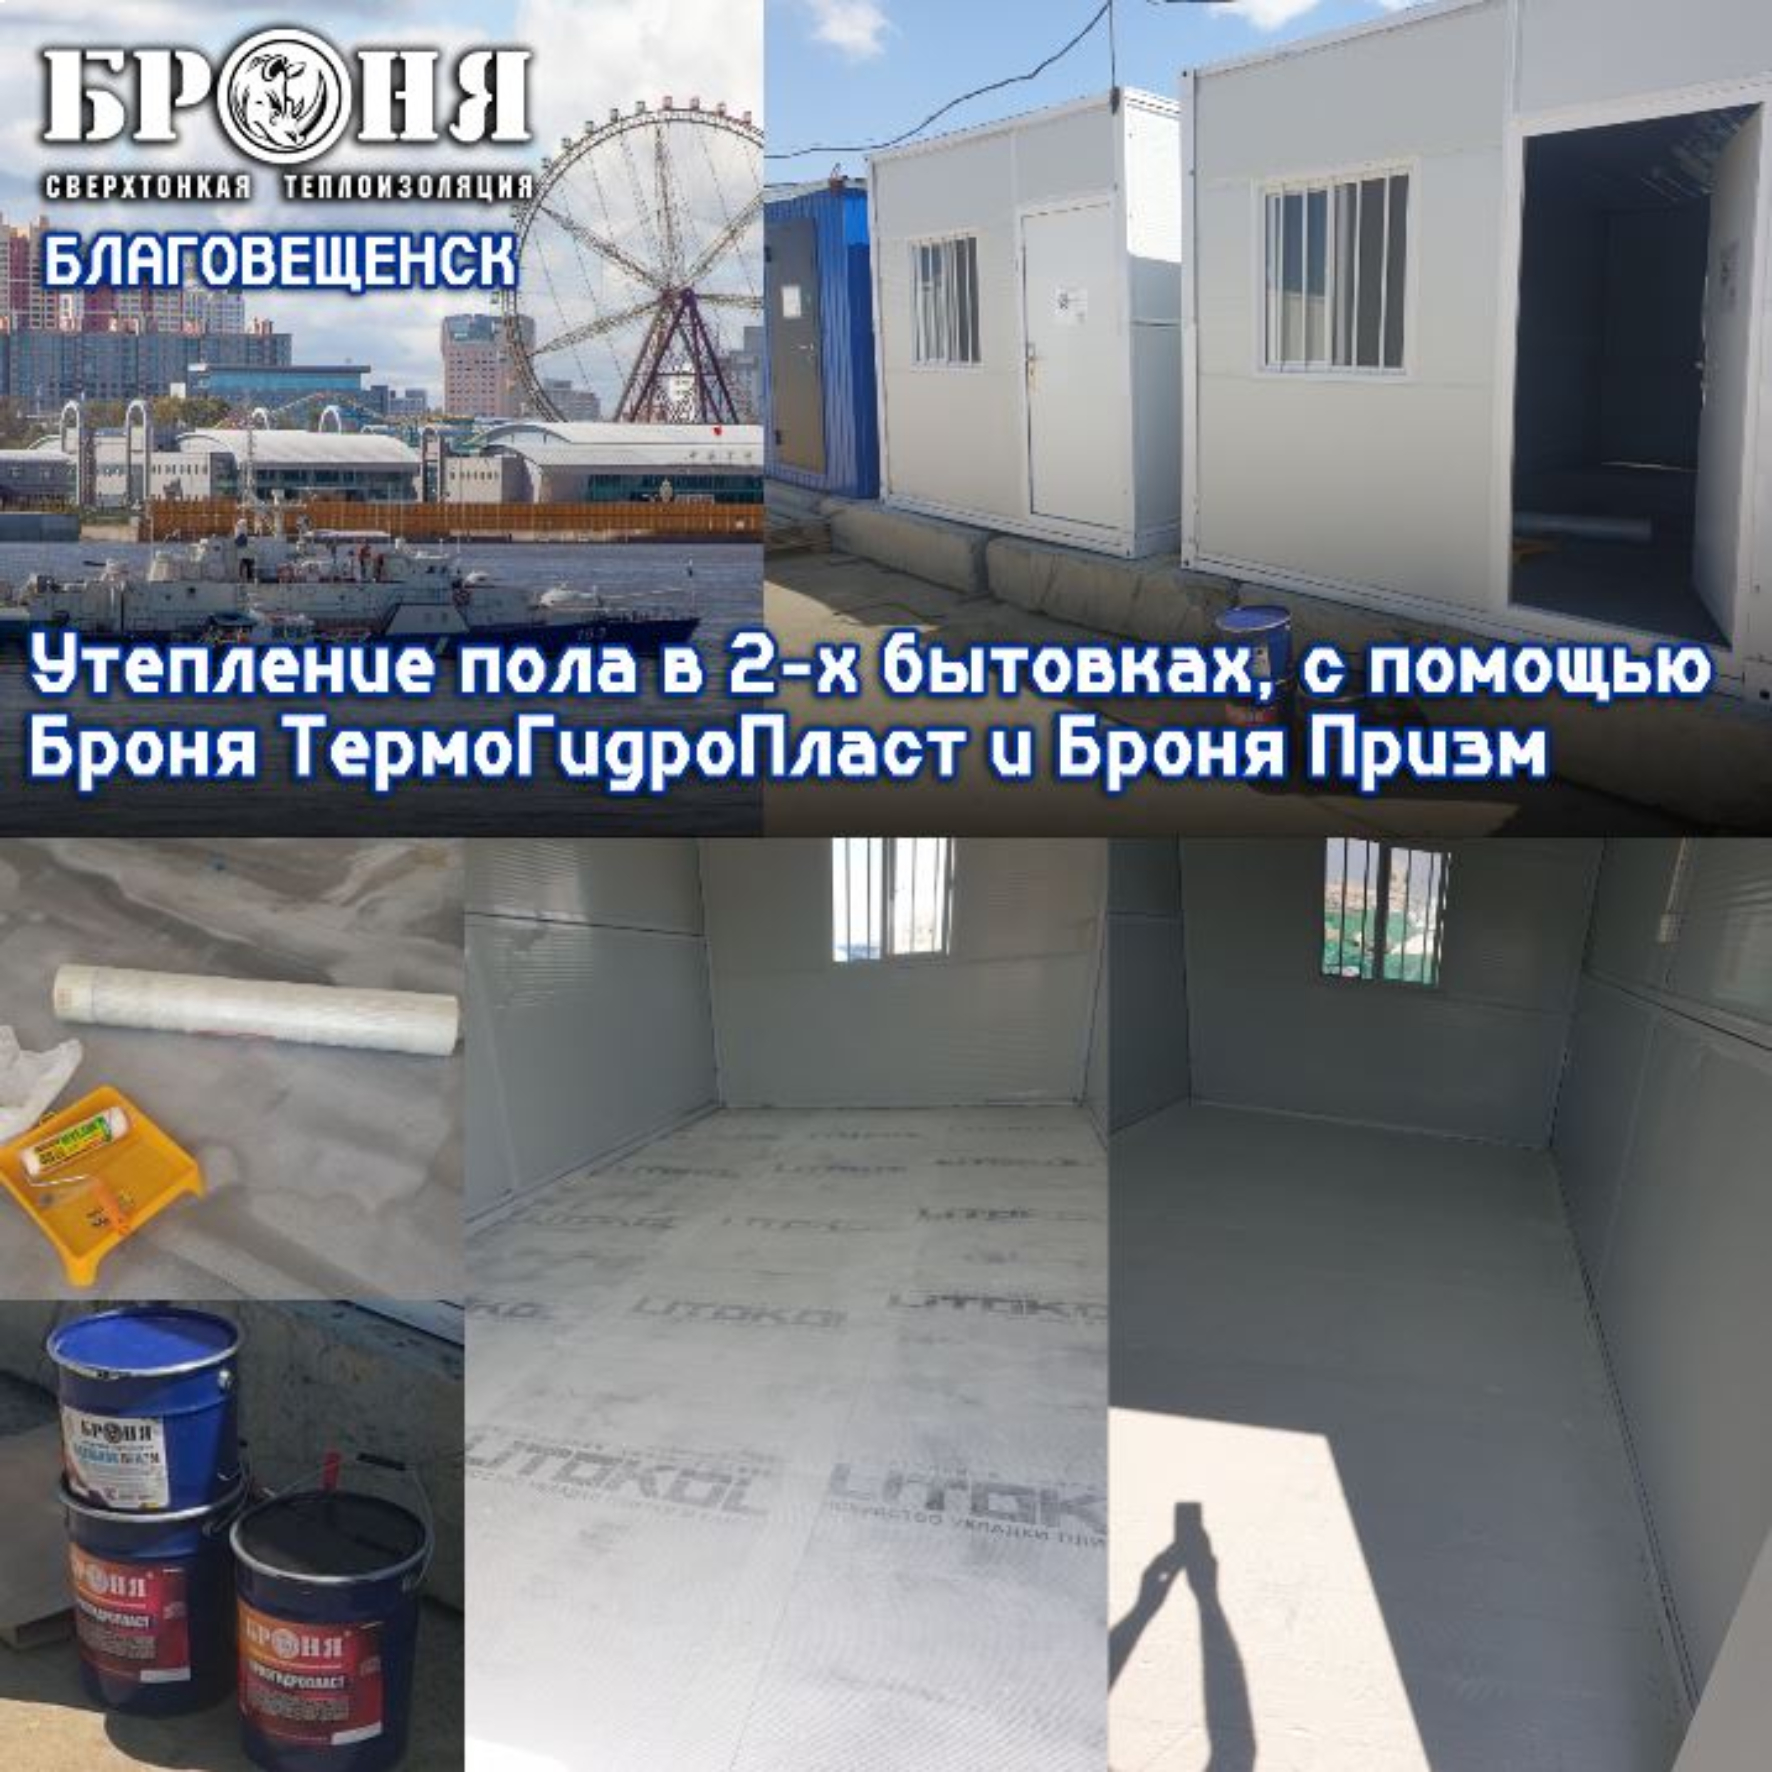 Insulation and waterproofing of the floor using Thermohydroplast and Bronya Prism ,in two cabins in S.Kani Kurgan, Blagoveshchensk (photos and videos with detailed comments from the dealer)